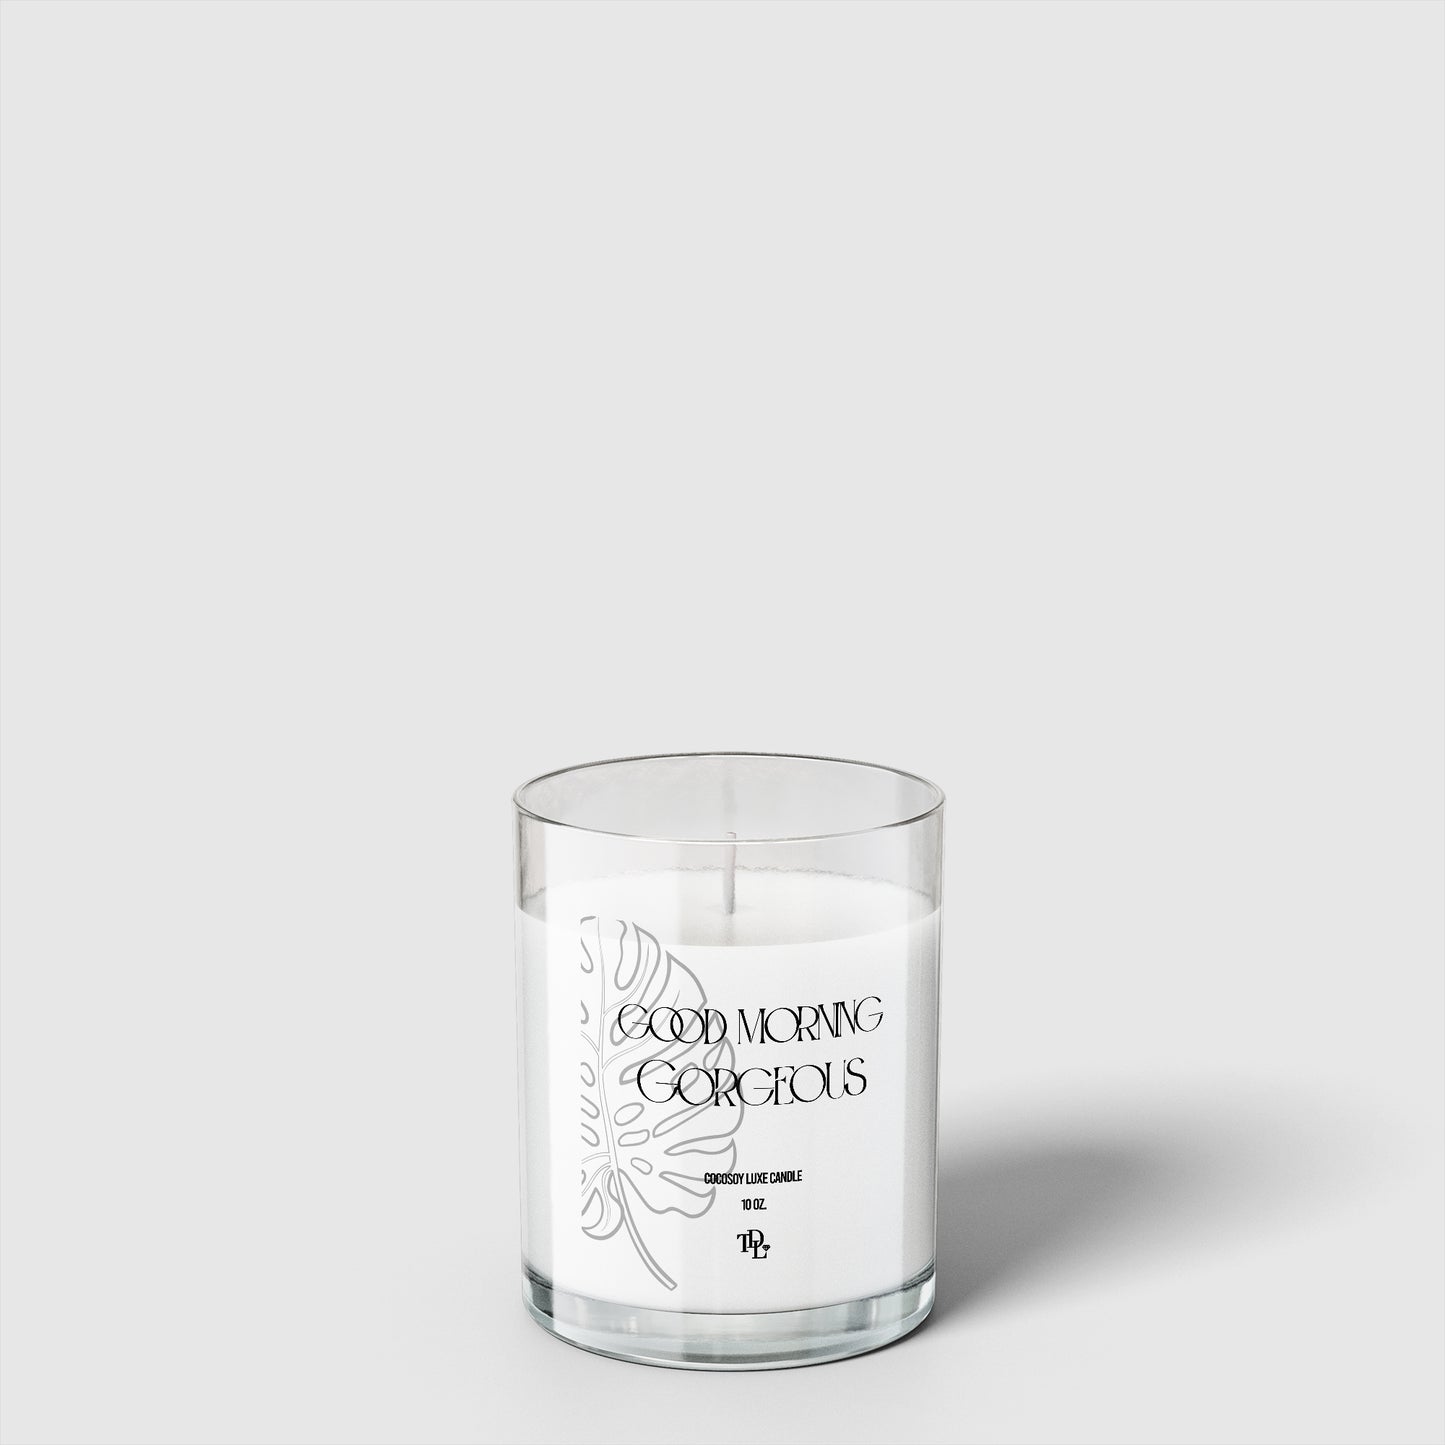 "Good Morning Gorgeous" Candle